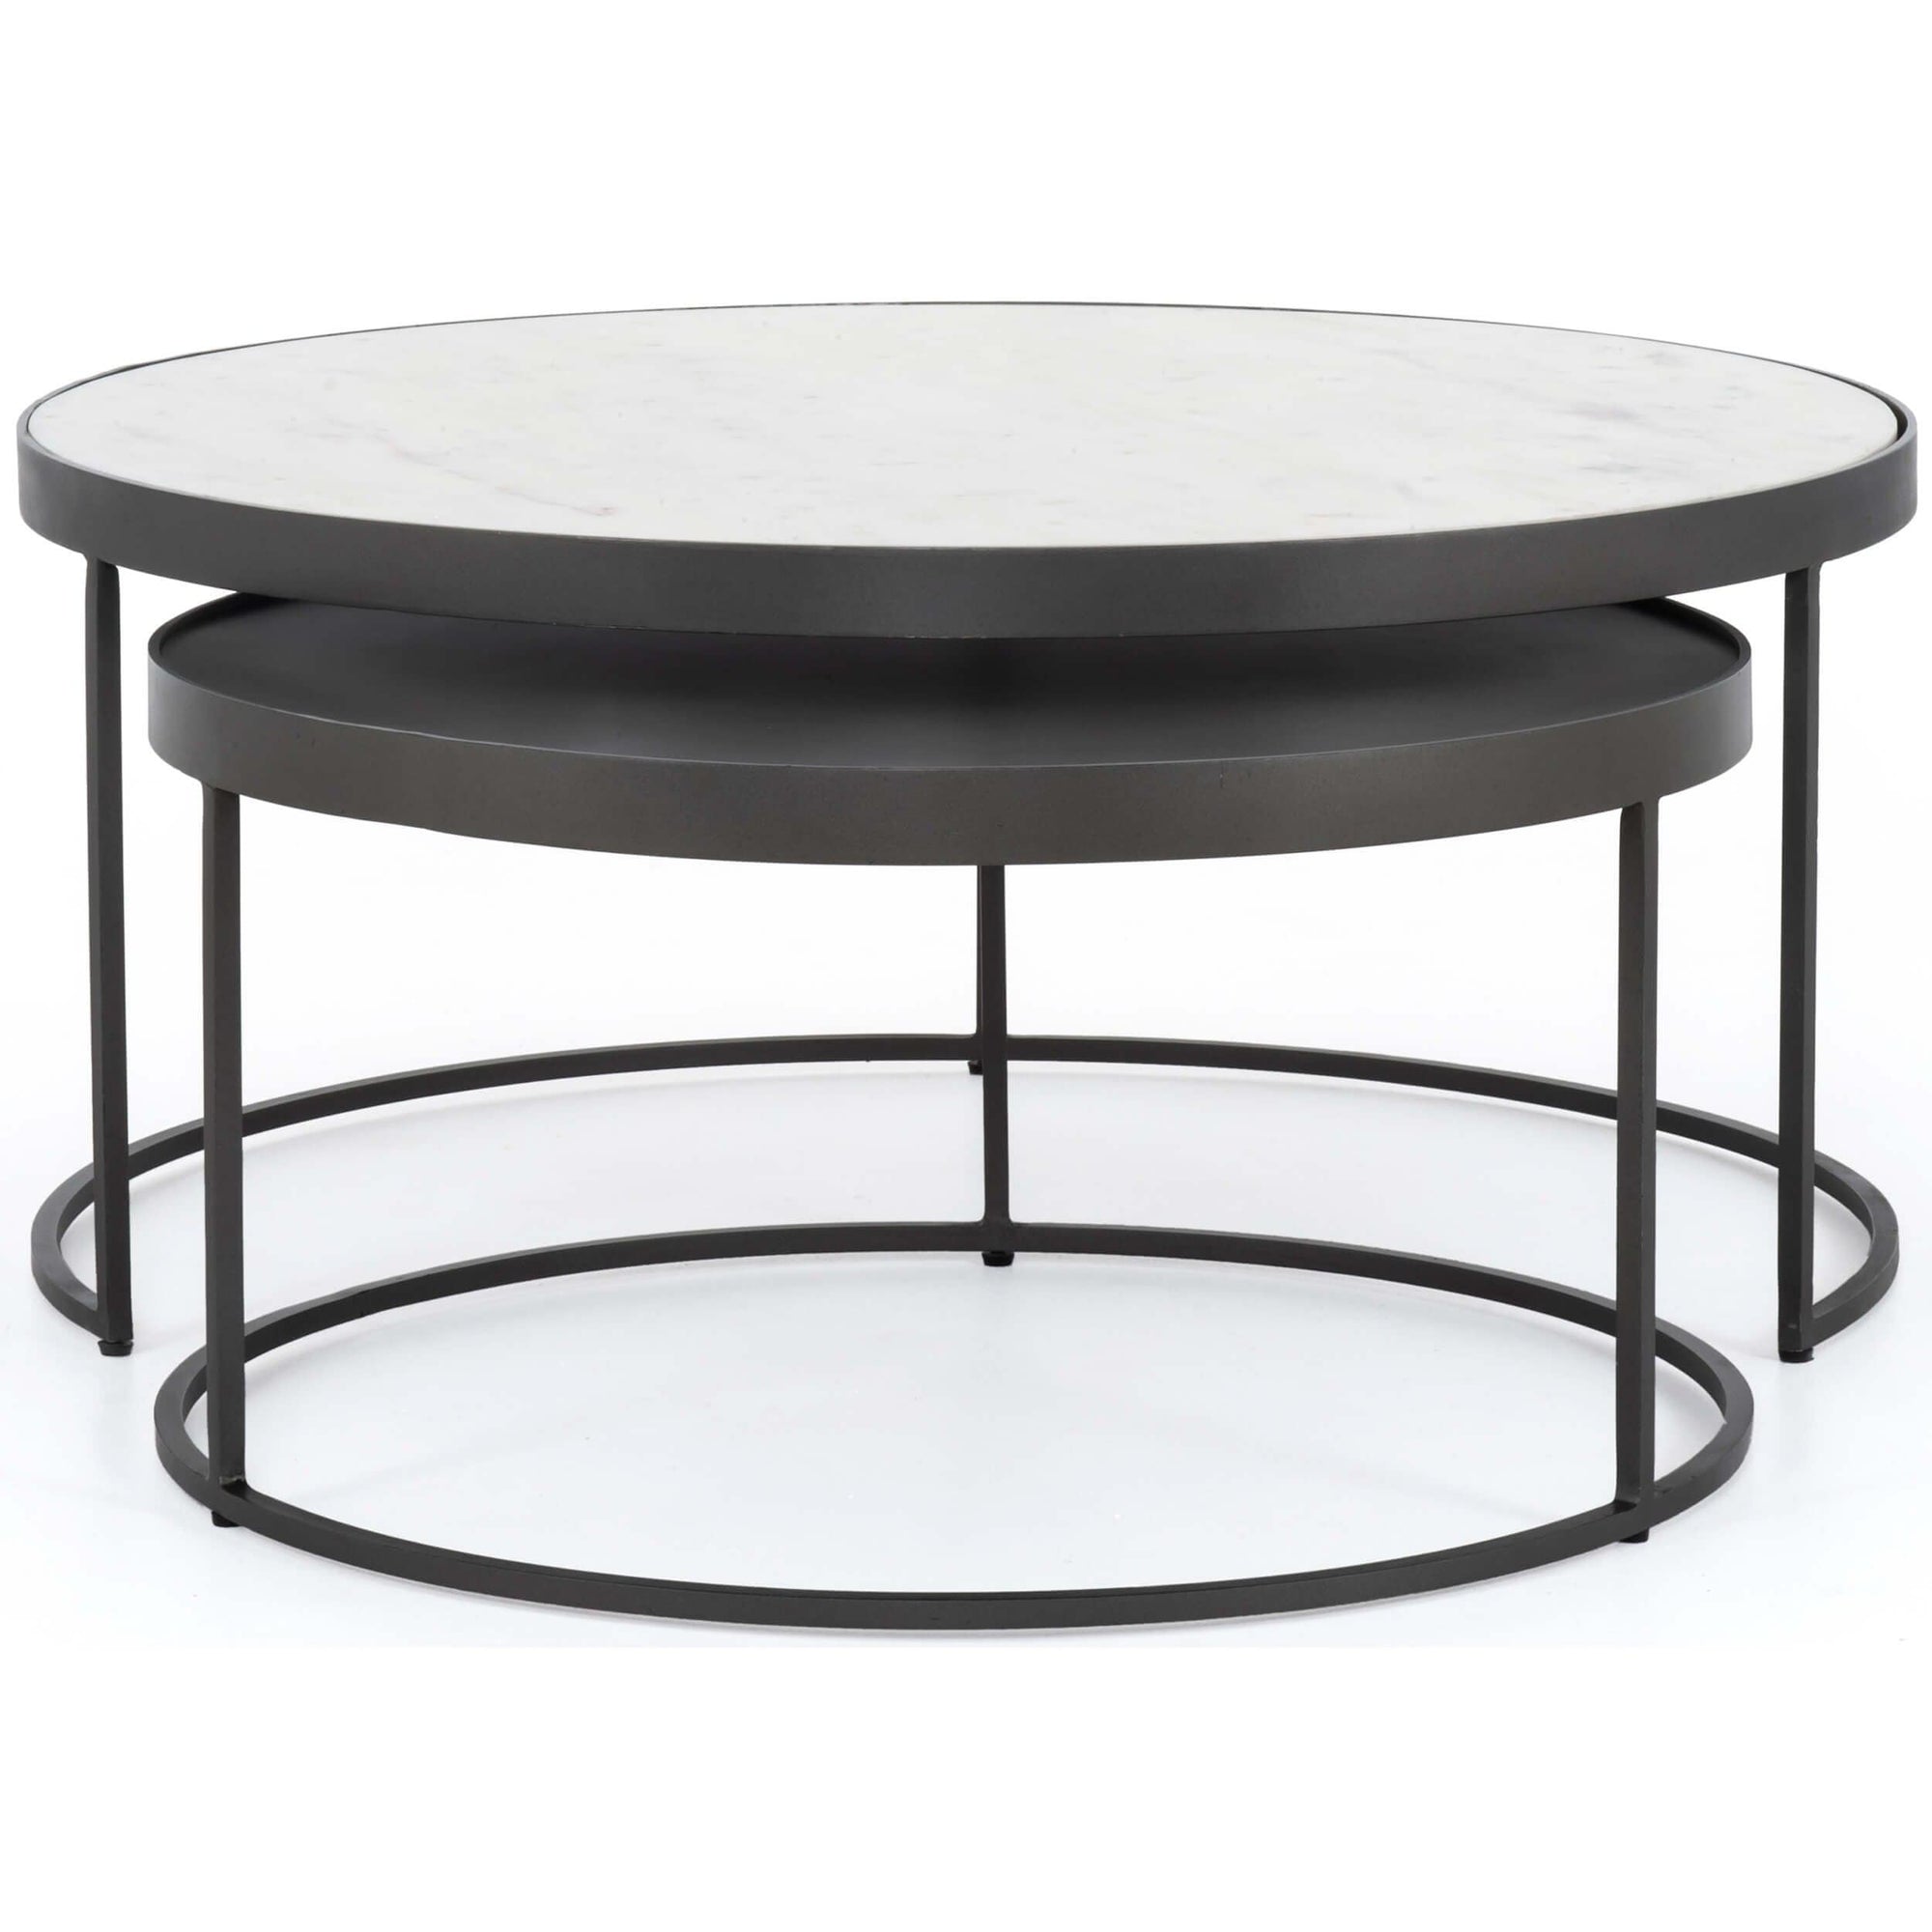 Shop Coffee Tables on Sale: Your Ultimate Guide to Finding the Perfect Piece